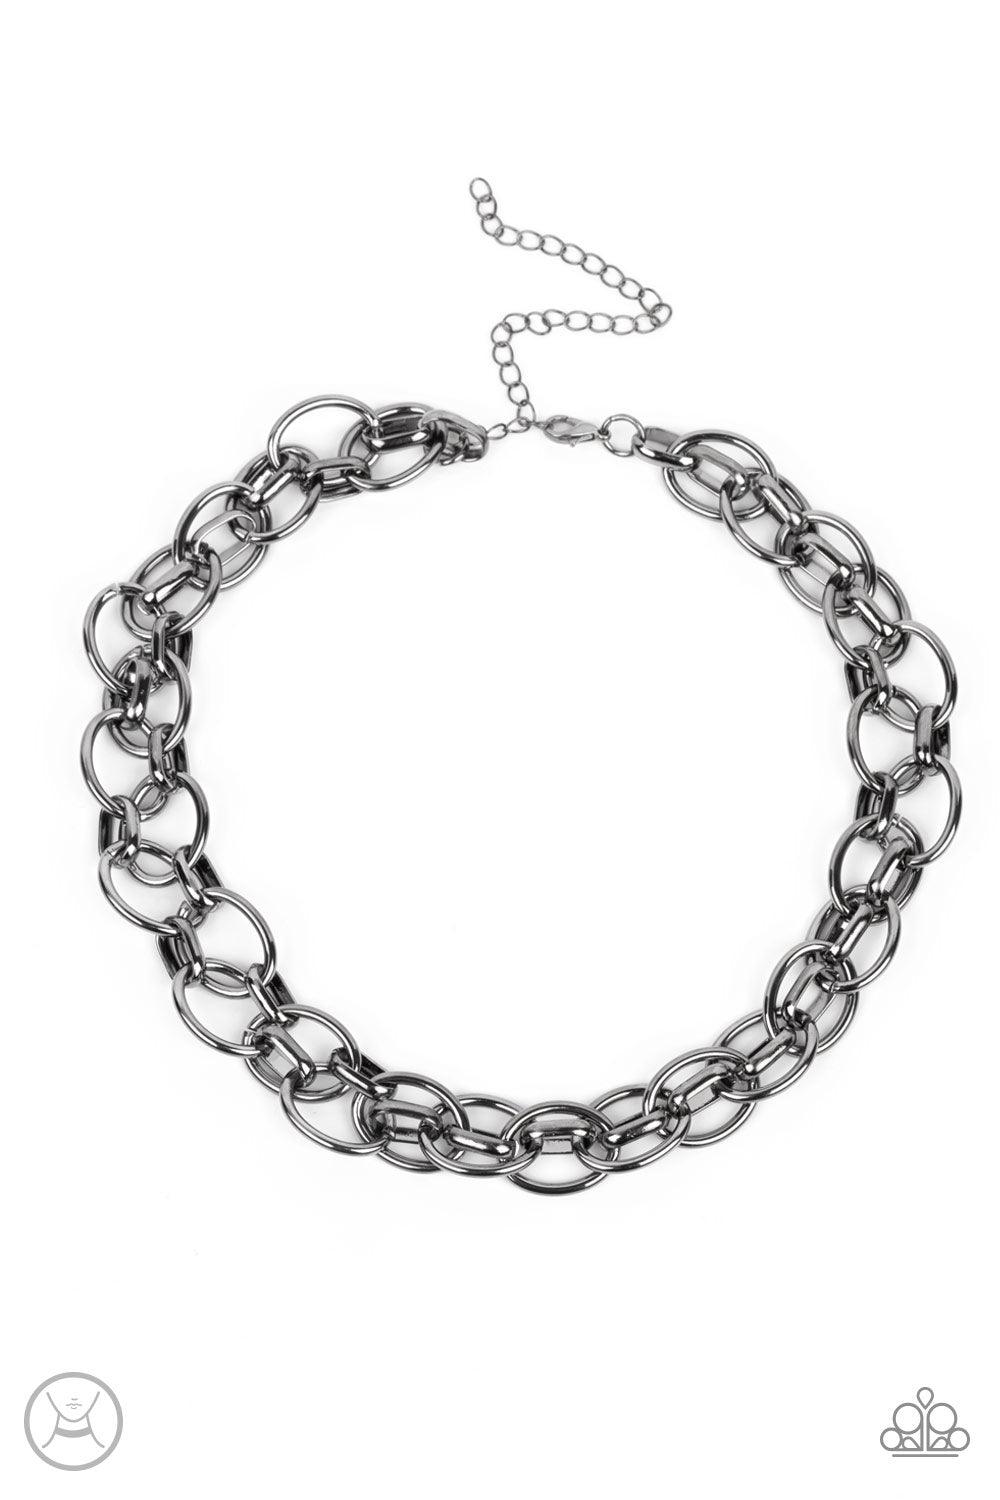 Paparazzi Accessories Tough Crowd - Black An oversized gunmetal chain interlocks with an oval linked chain, resulting in a rebellious fashion around the neck. Features an adjustable clasp closure. Sold as one individual choker necklace. Includes one pair